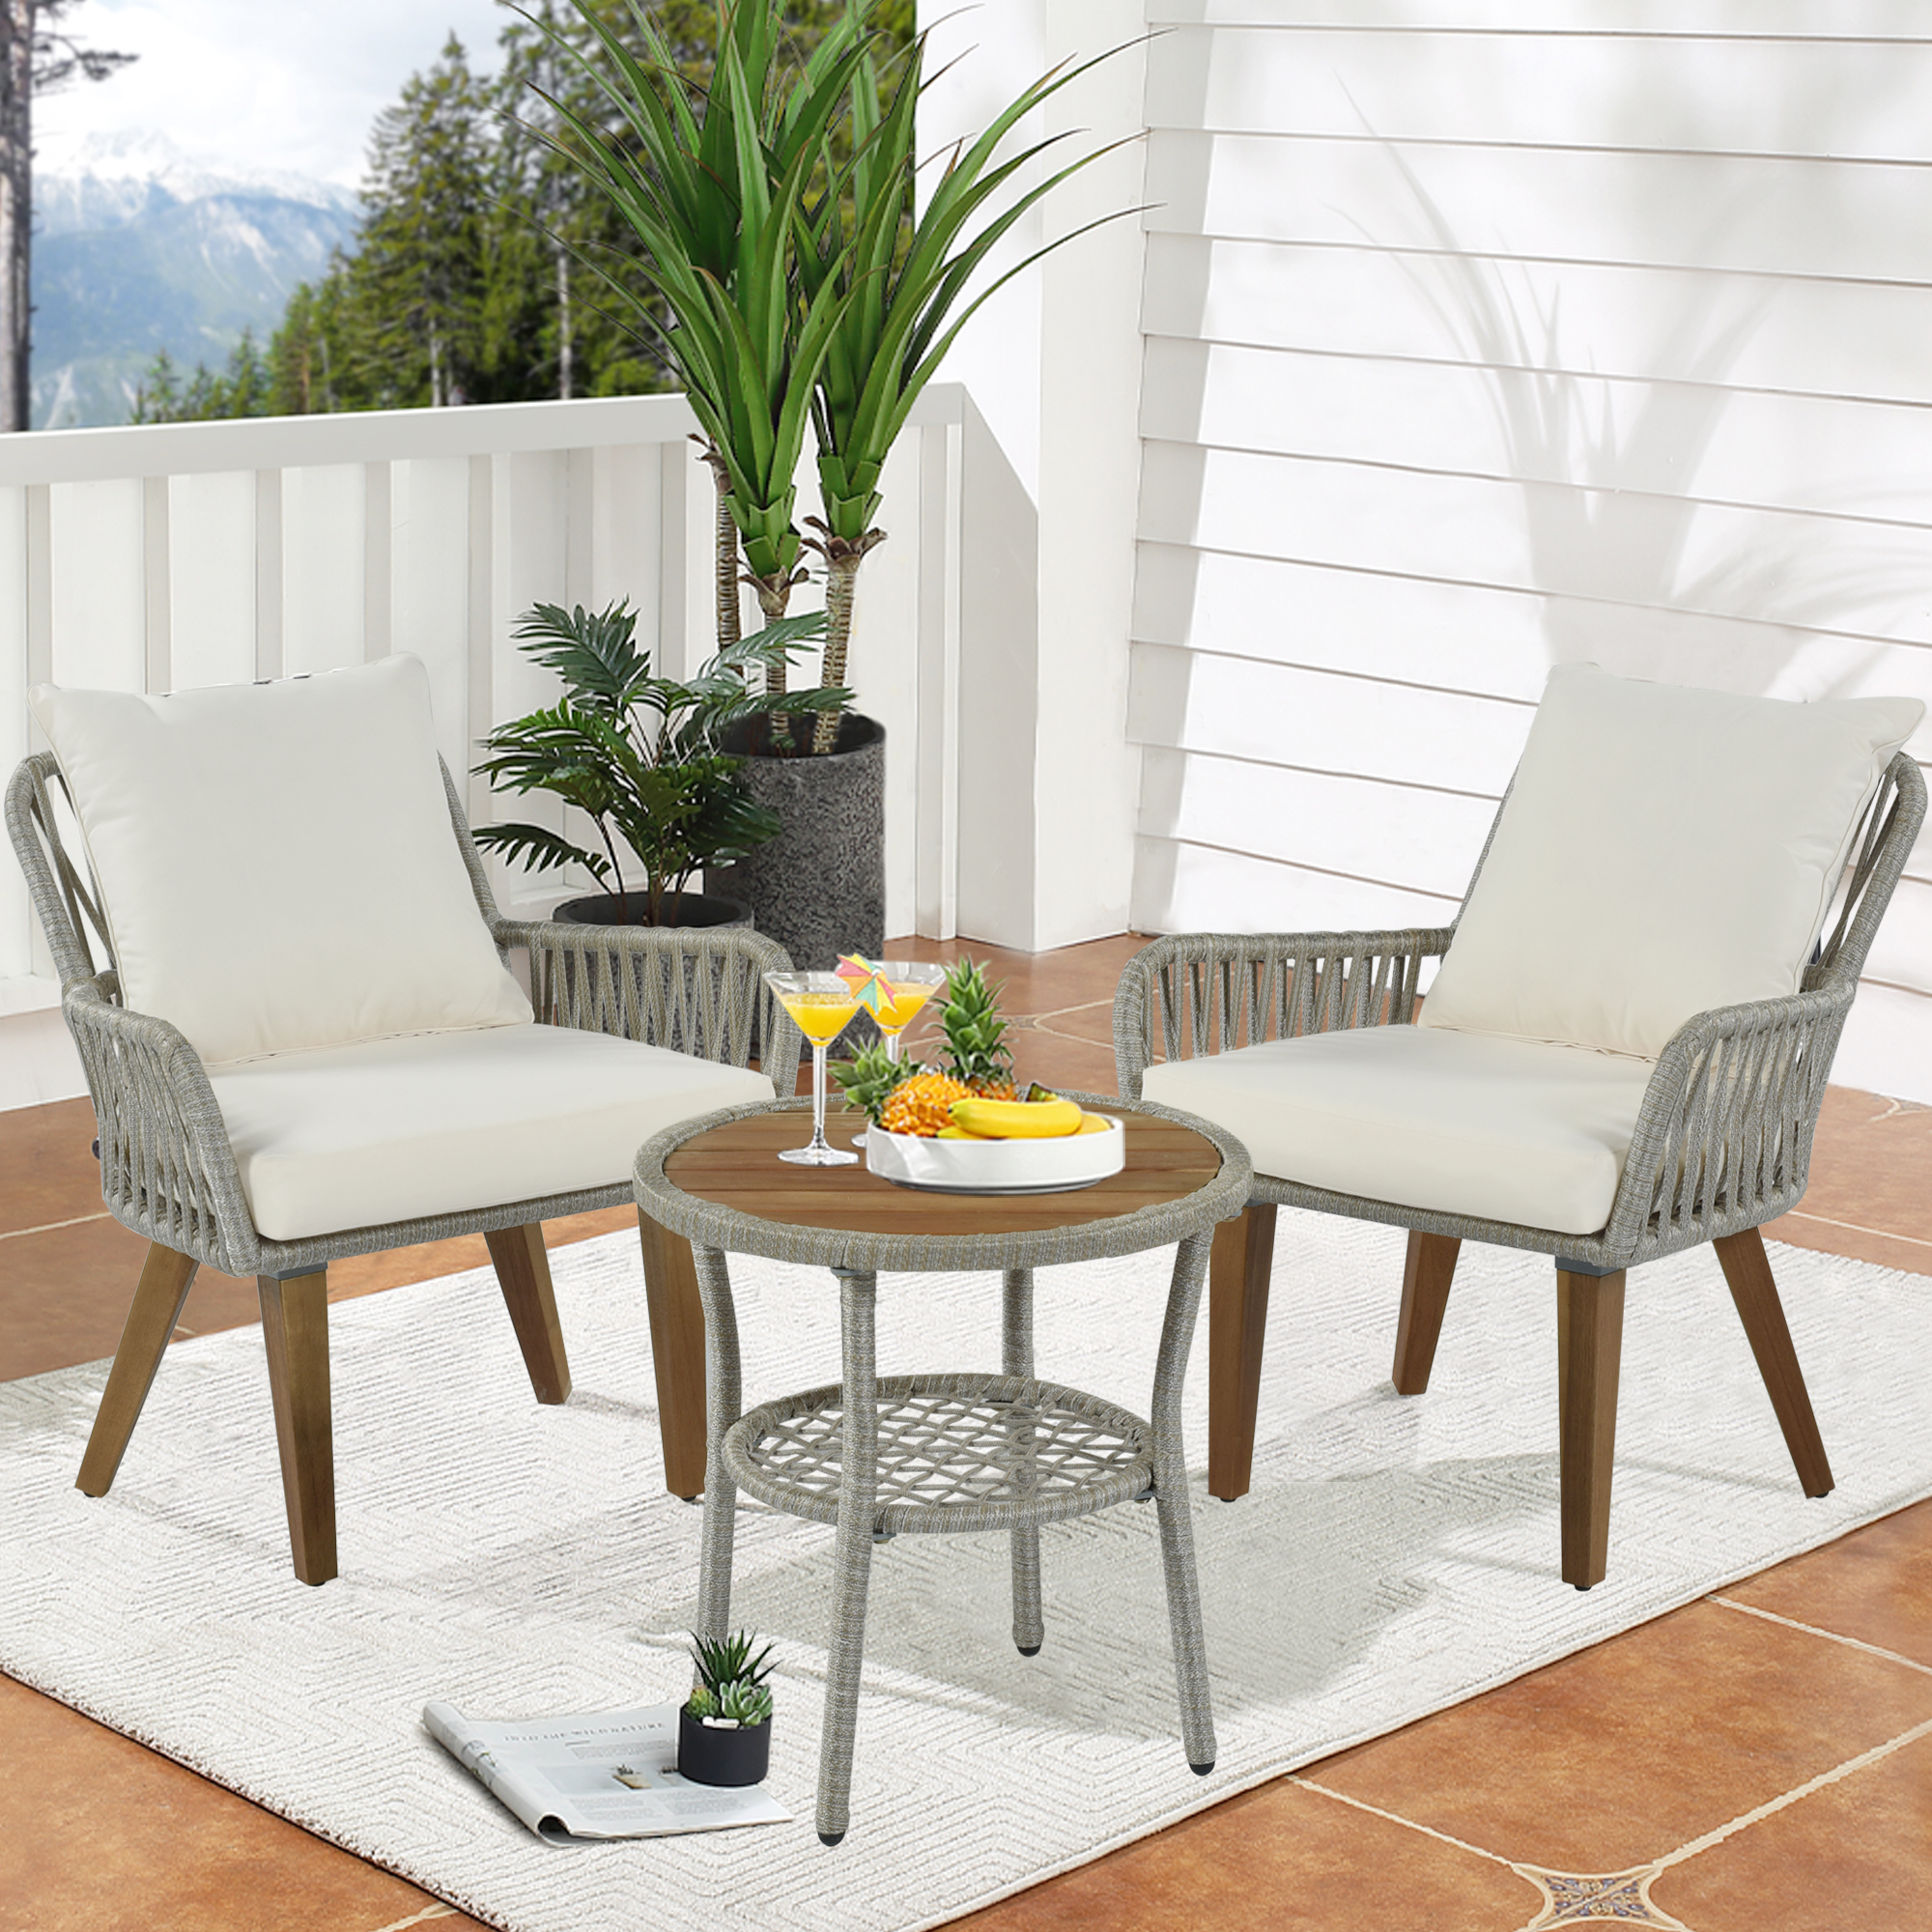 Lightweight Patio Bistro Set, 3 Piece Outdoor Bistro Table & Chairs Set, Woven-Rope Conversation Set with Wood Tabletop and Cushions for Garden Balcony Yard, Gray Rope+Beige Fabric, T161 - image 2 of 9